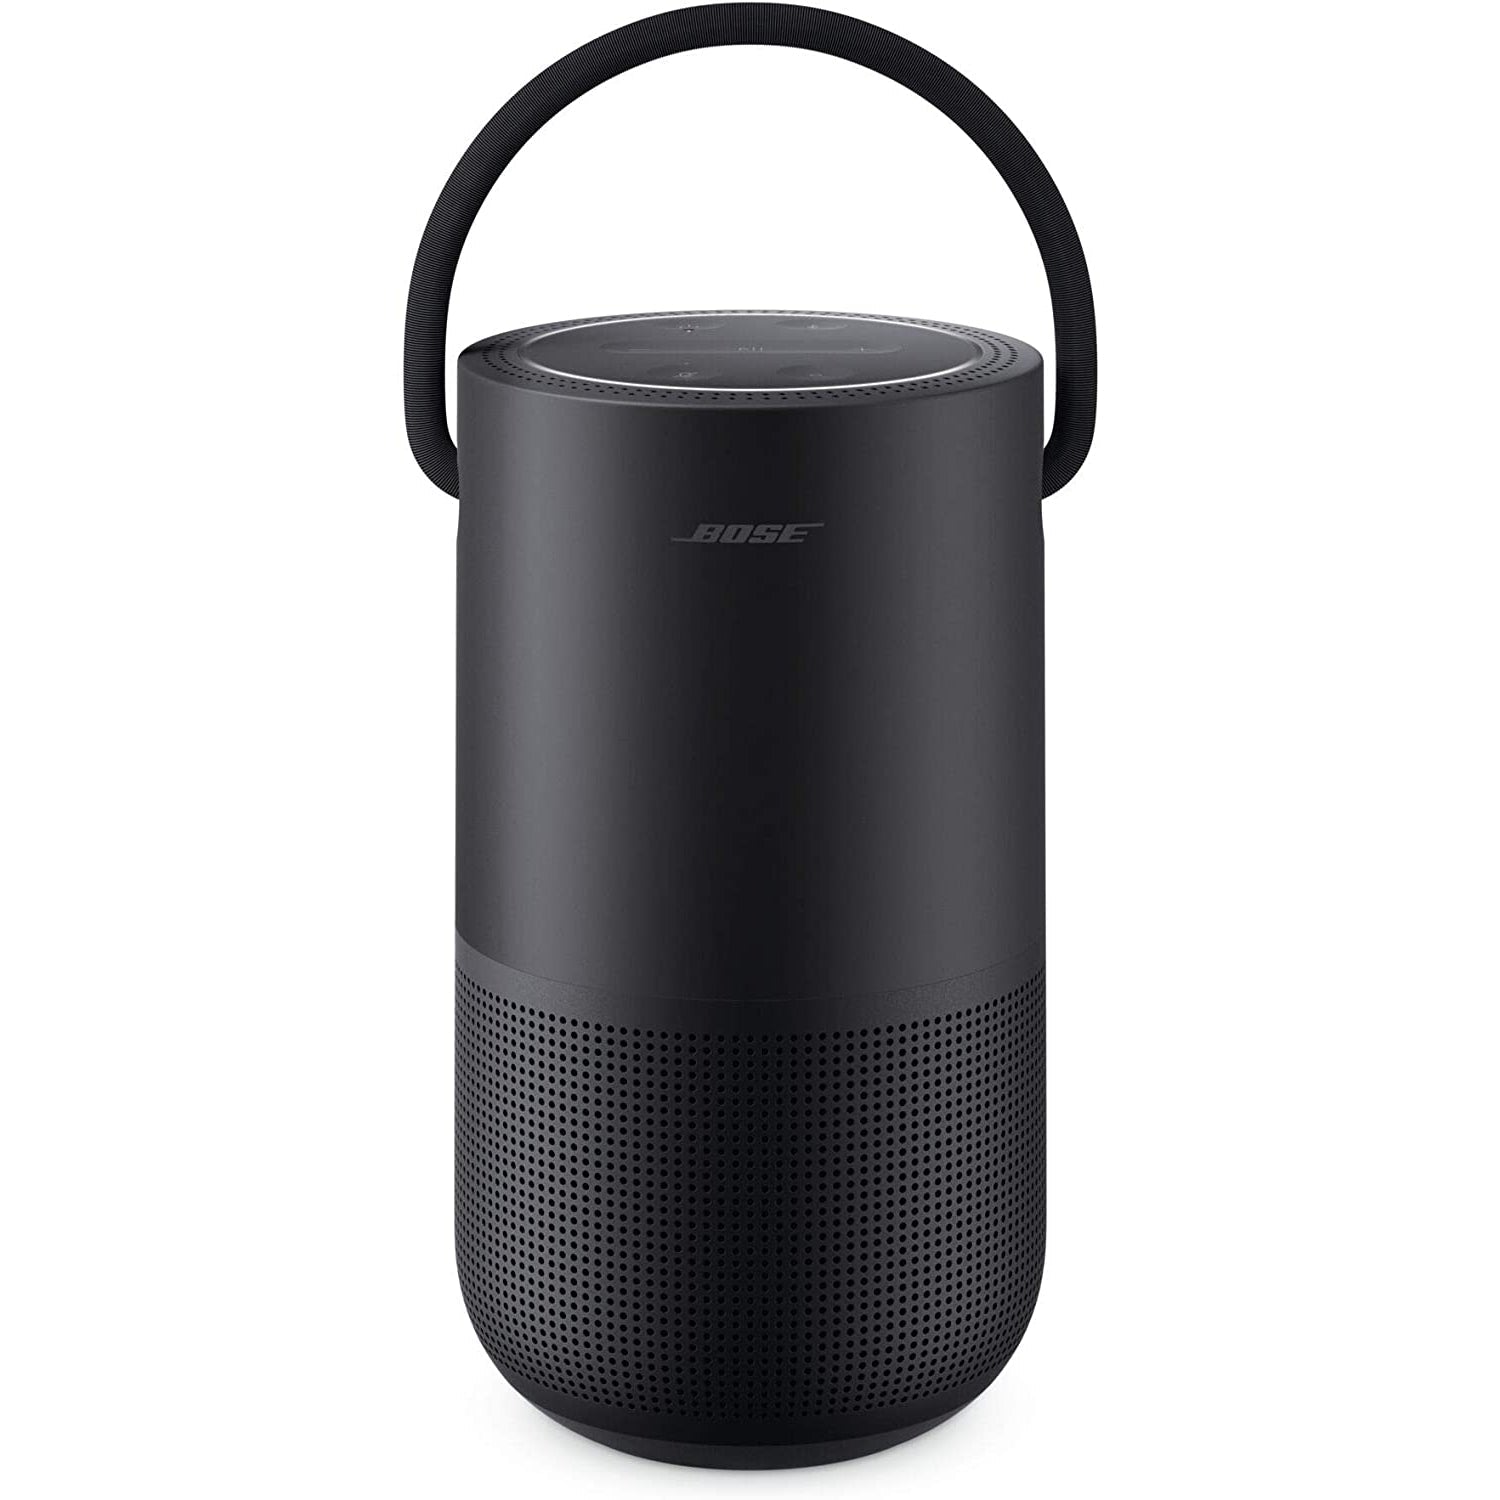 Bose Portable Home Smart Speaker with Voice Recognition and Control - Black - Refurbished Pristine